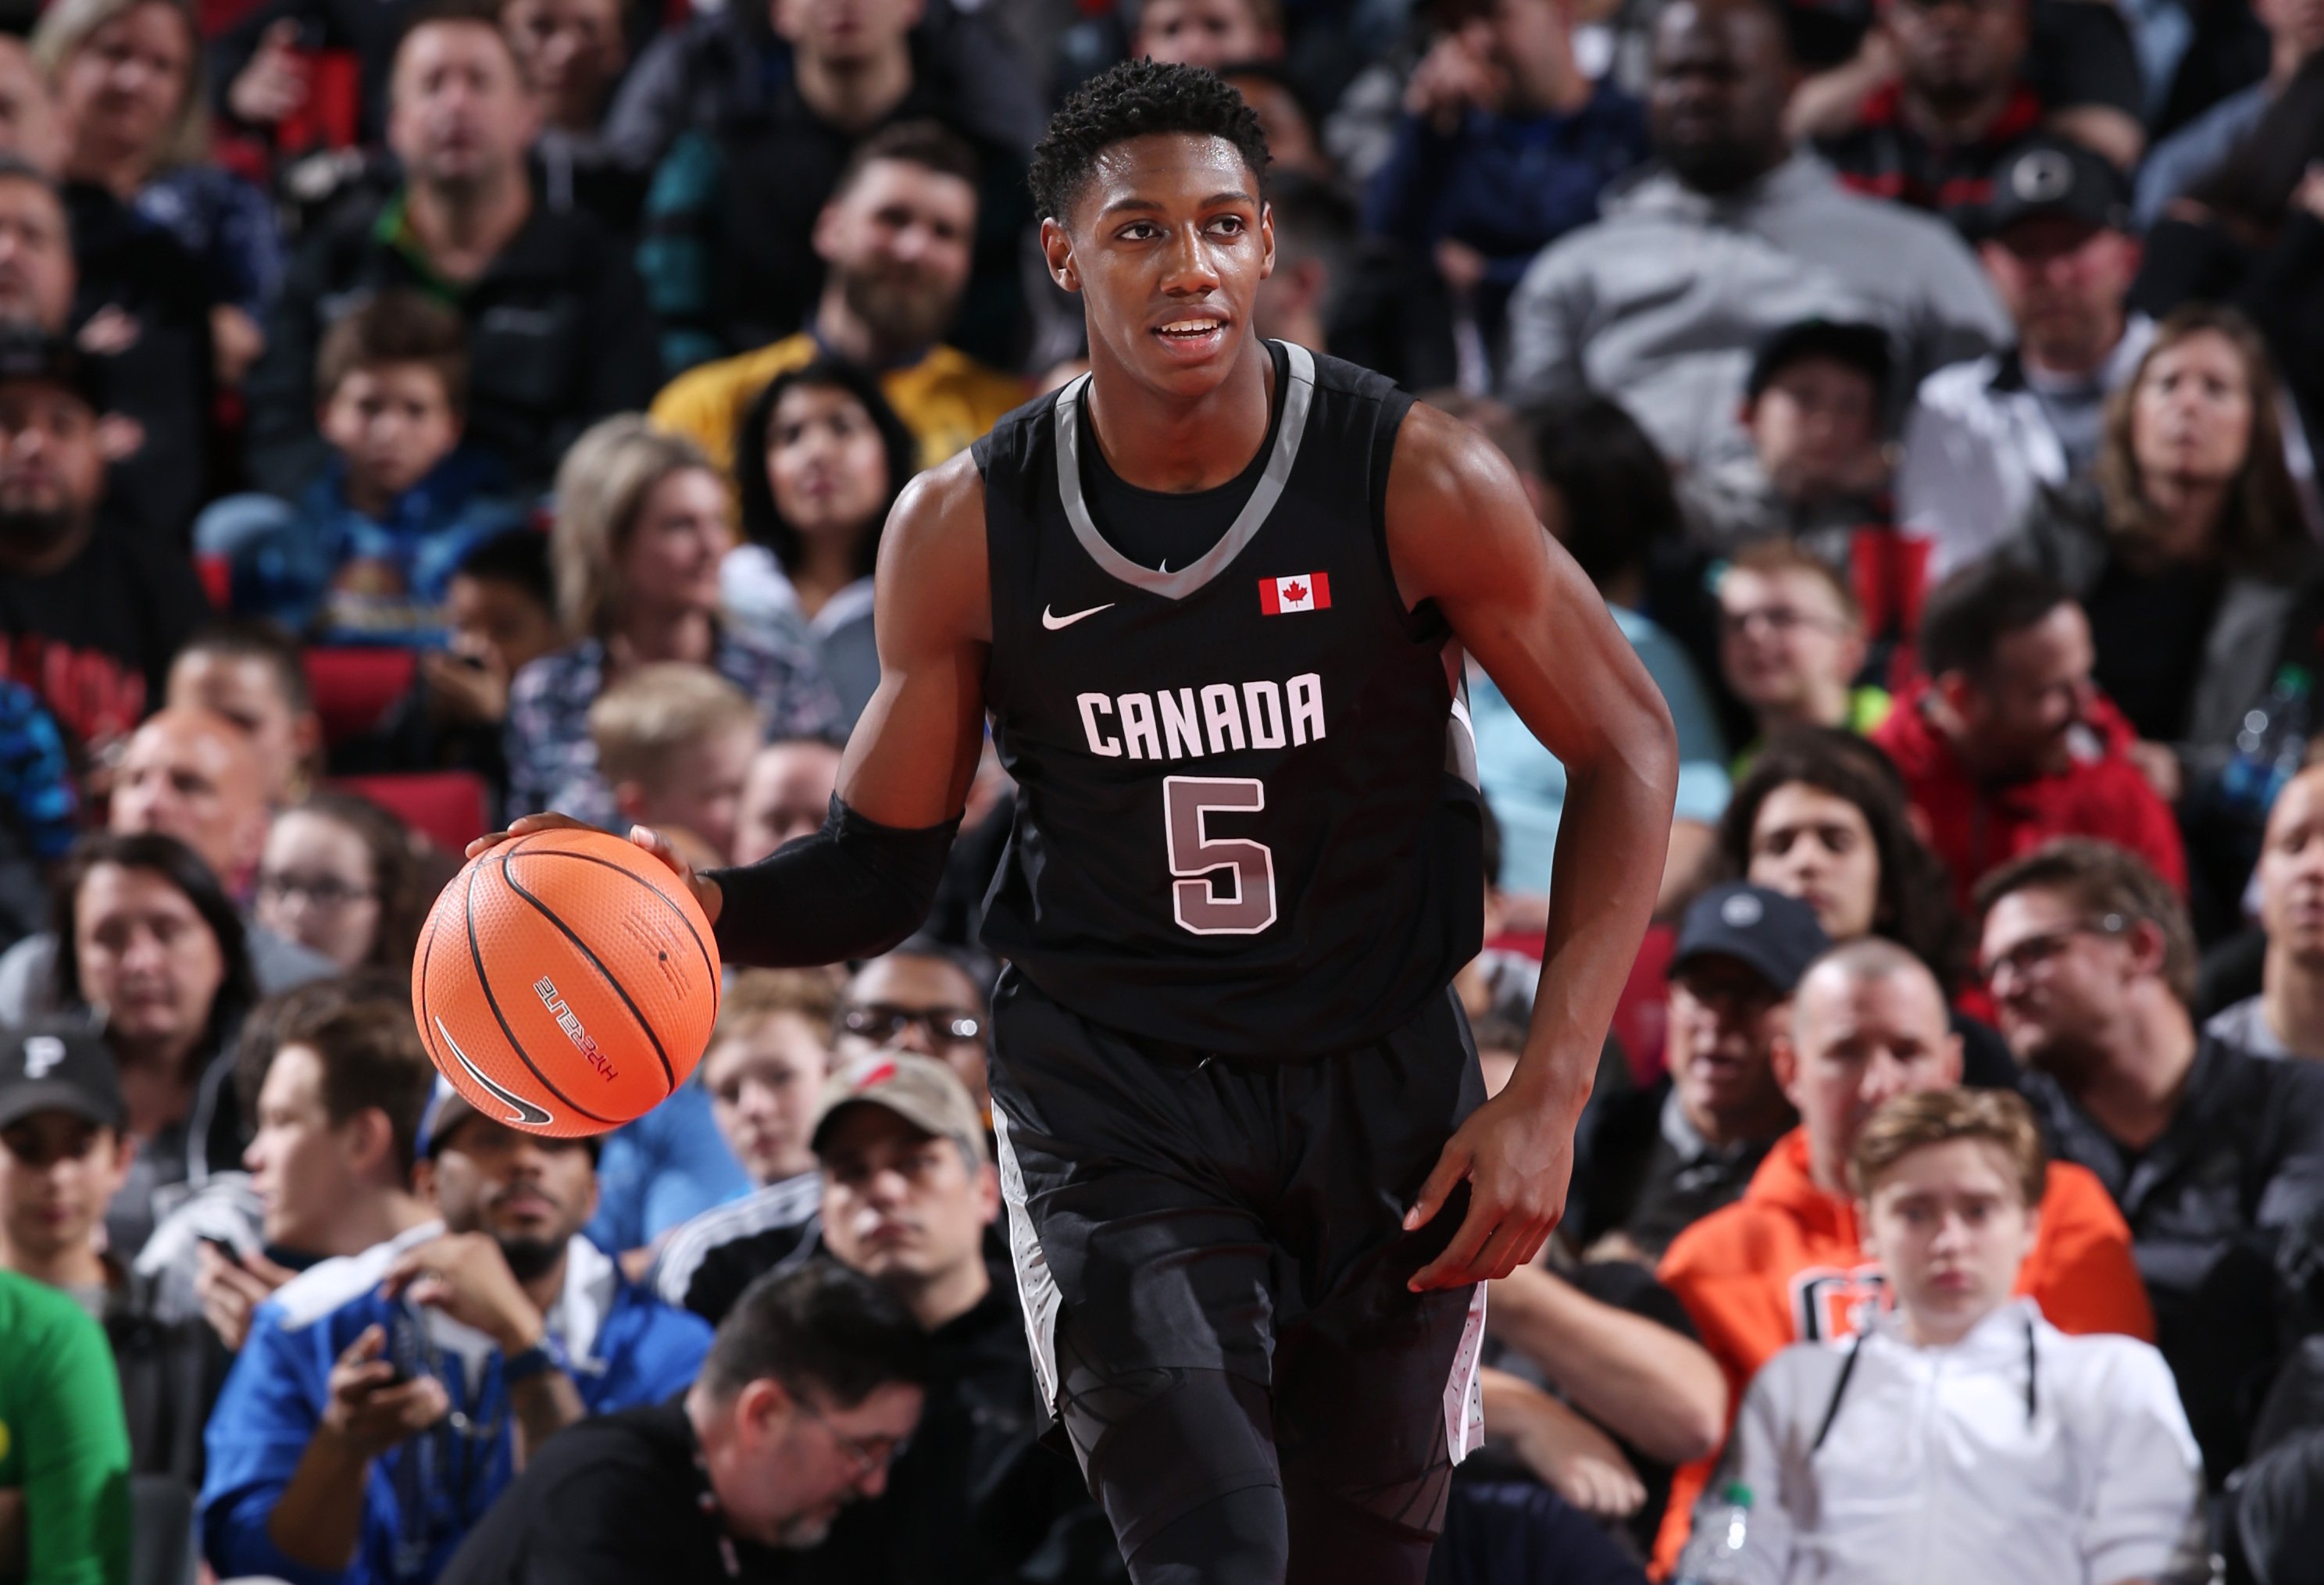 Check Out RJ Barrett As He Spins Past Luka Doncic - Duke Basketball Report